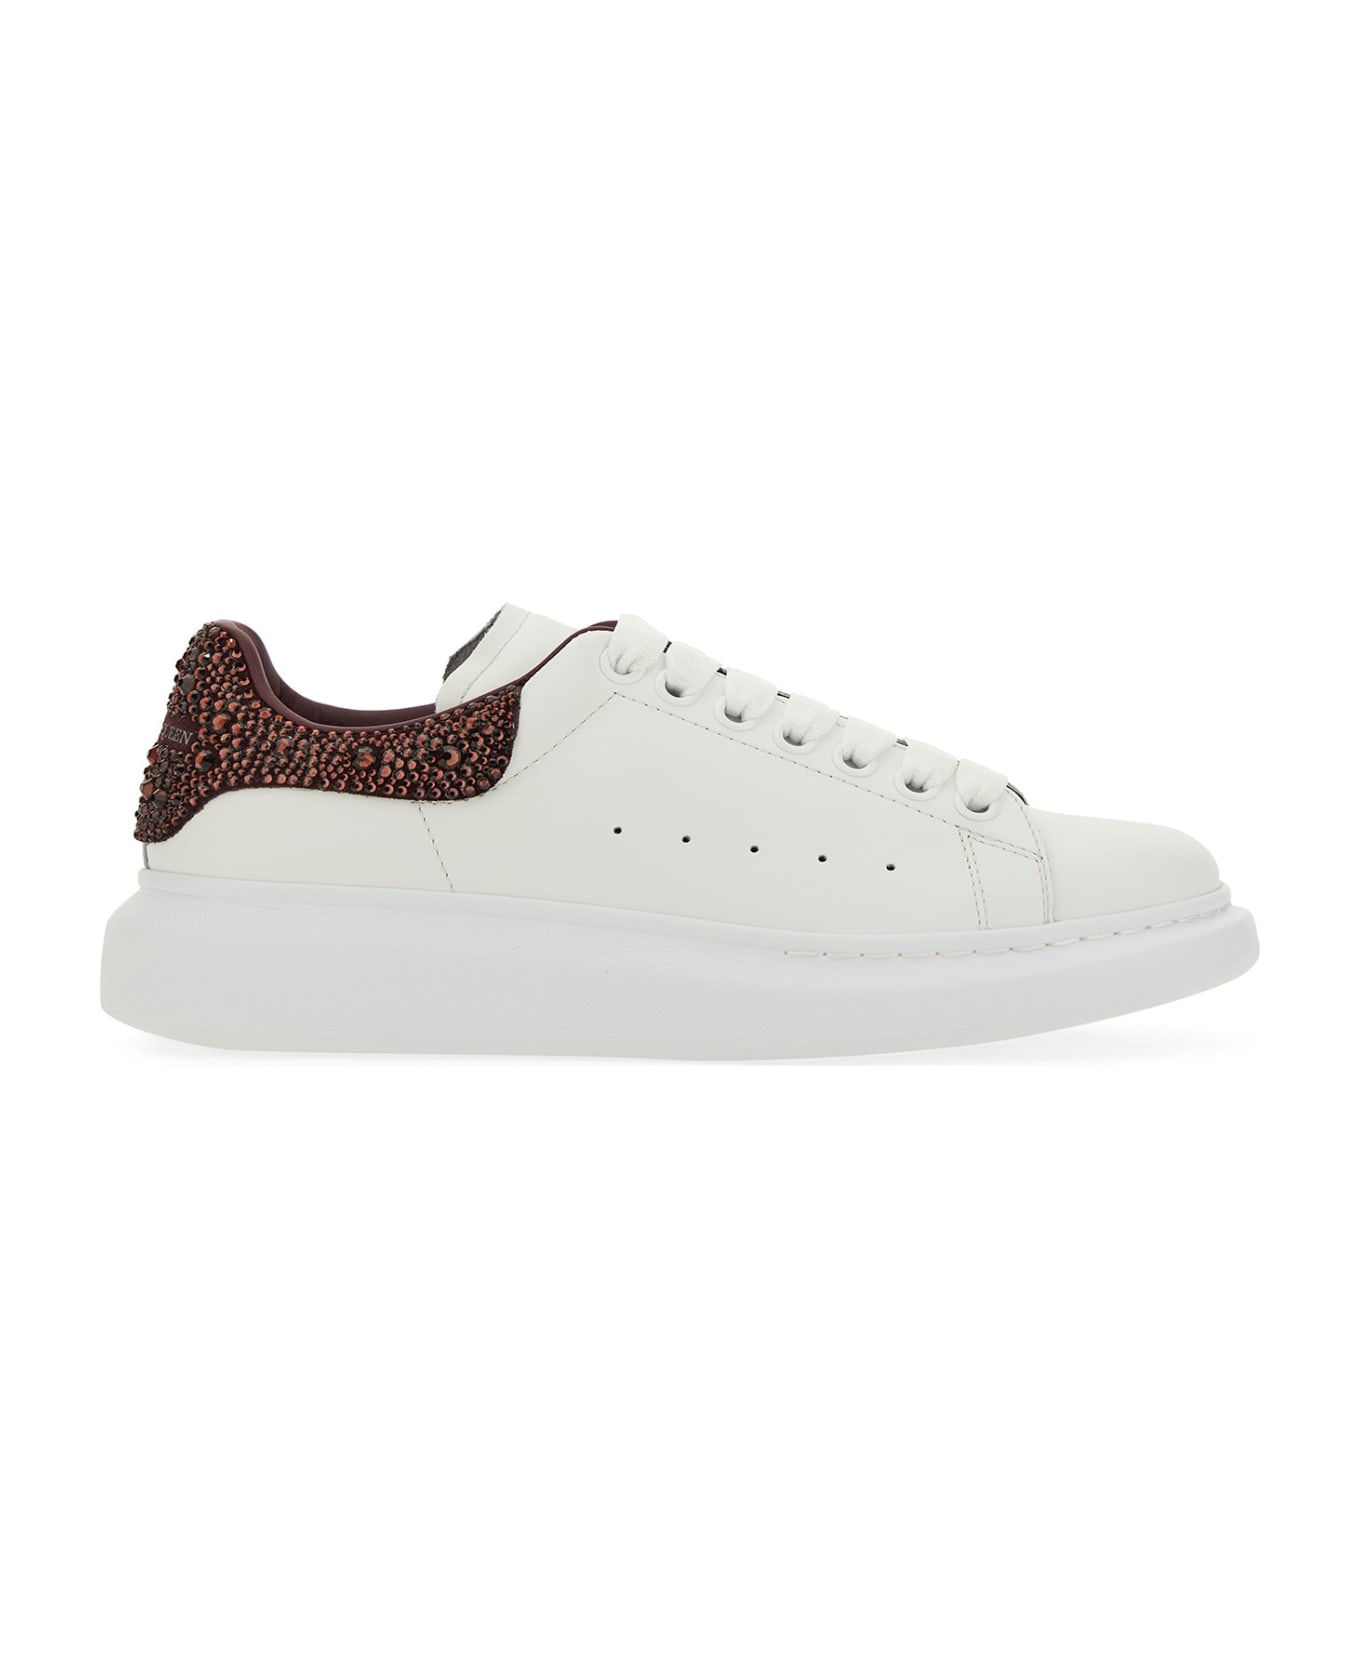 Alexander McQueen Oversized Sneakers In White And Dark Burgundy With Rhinestones - White